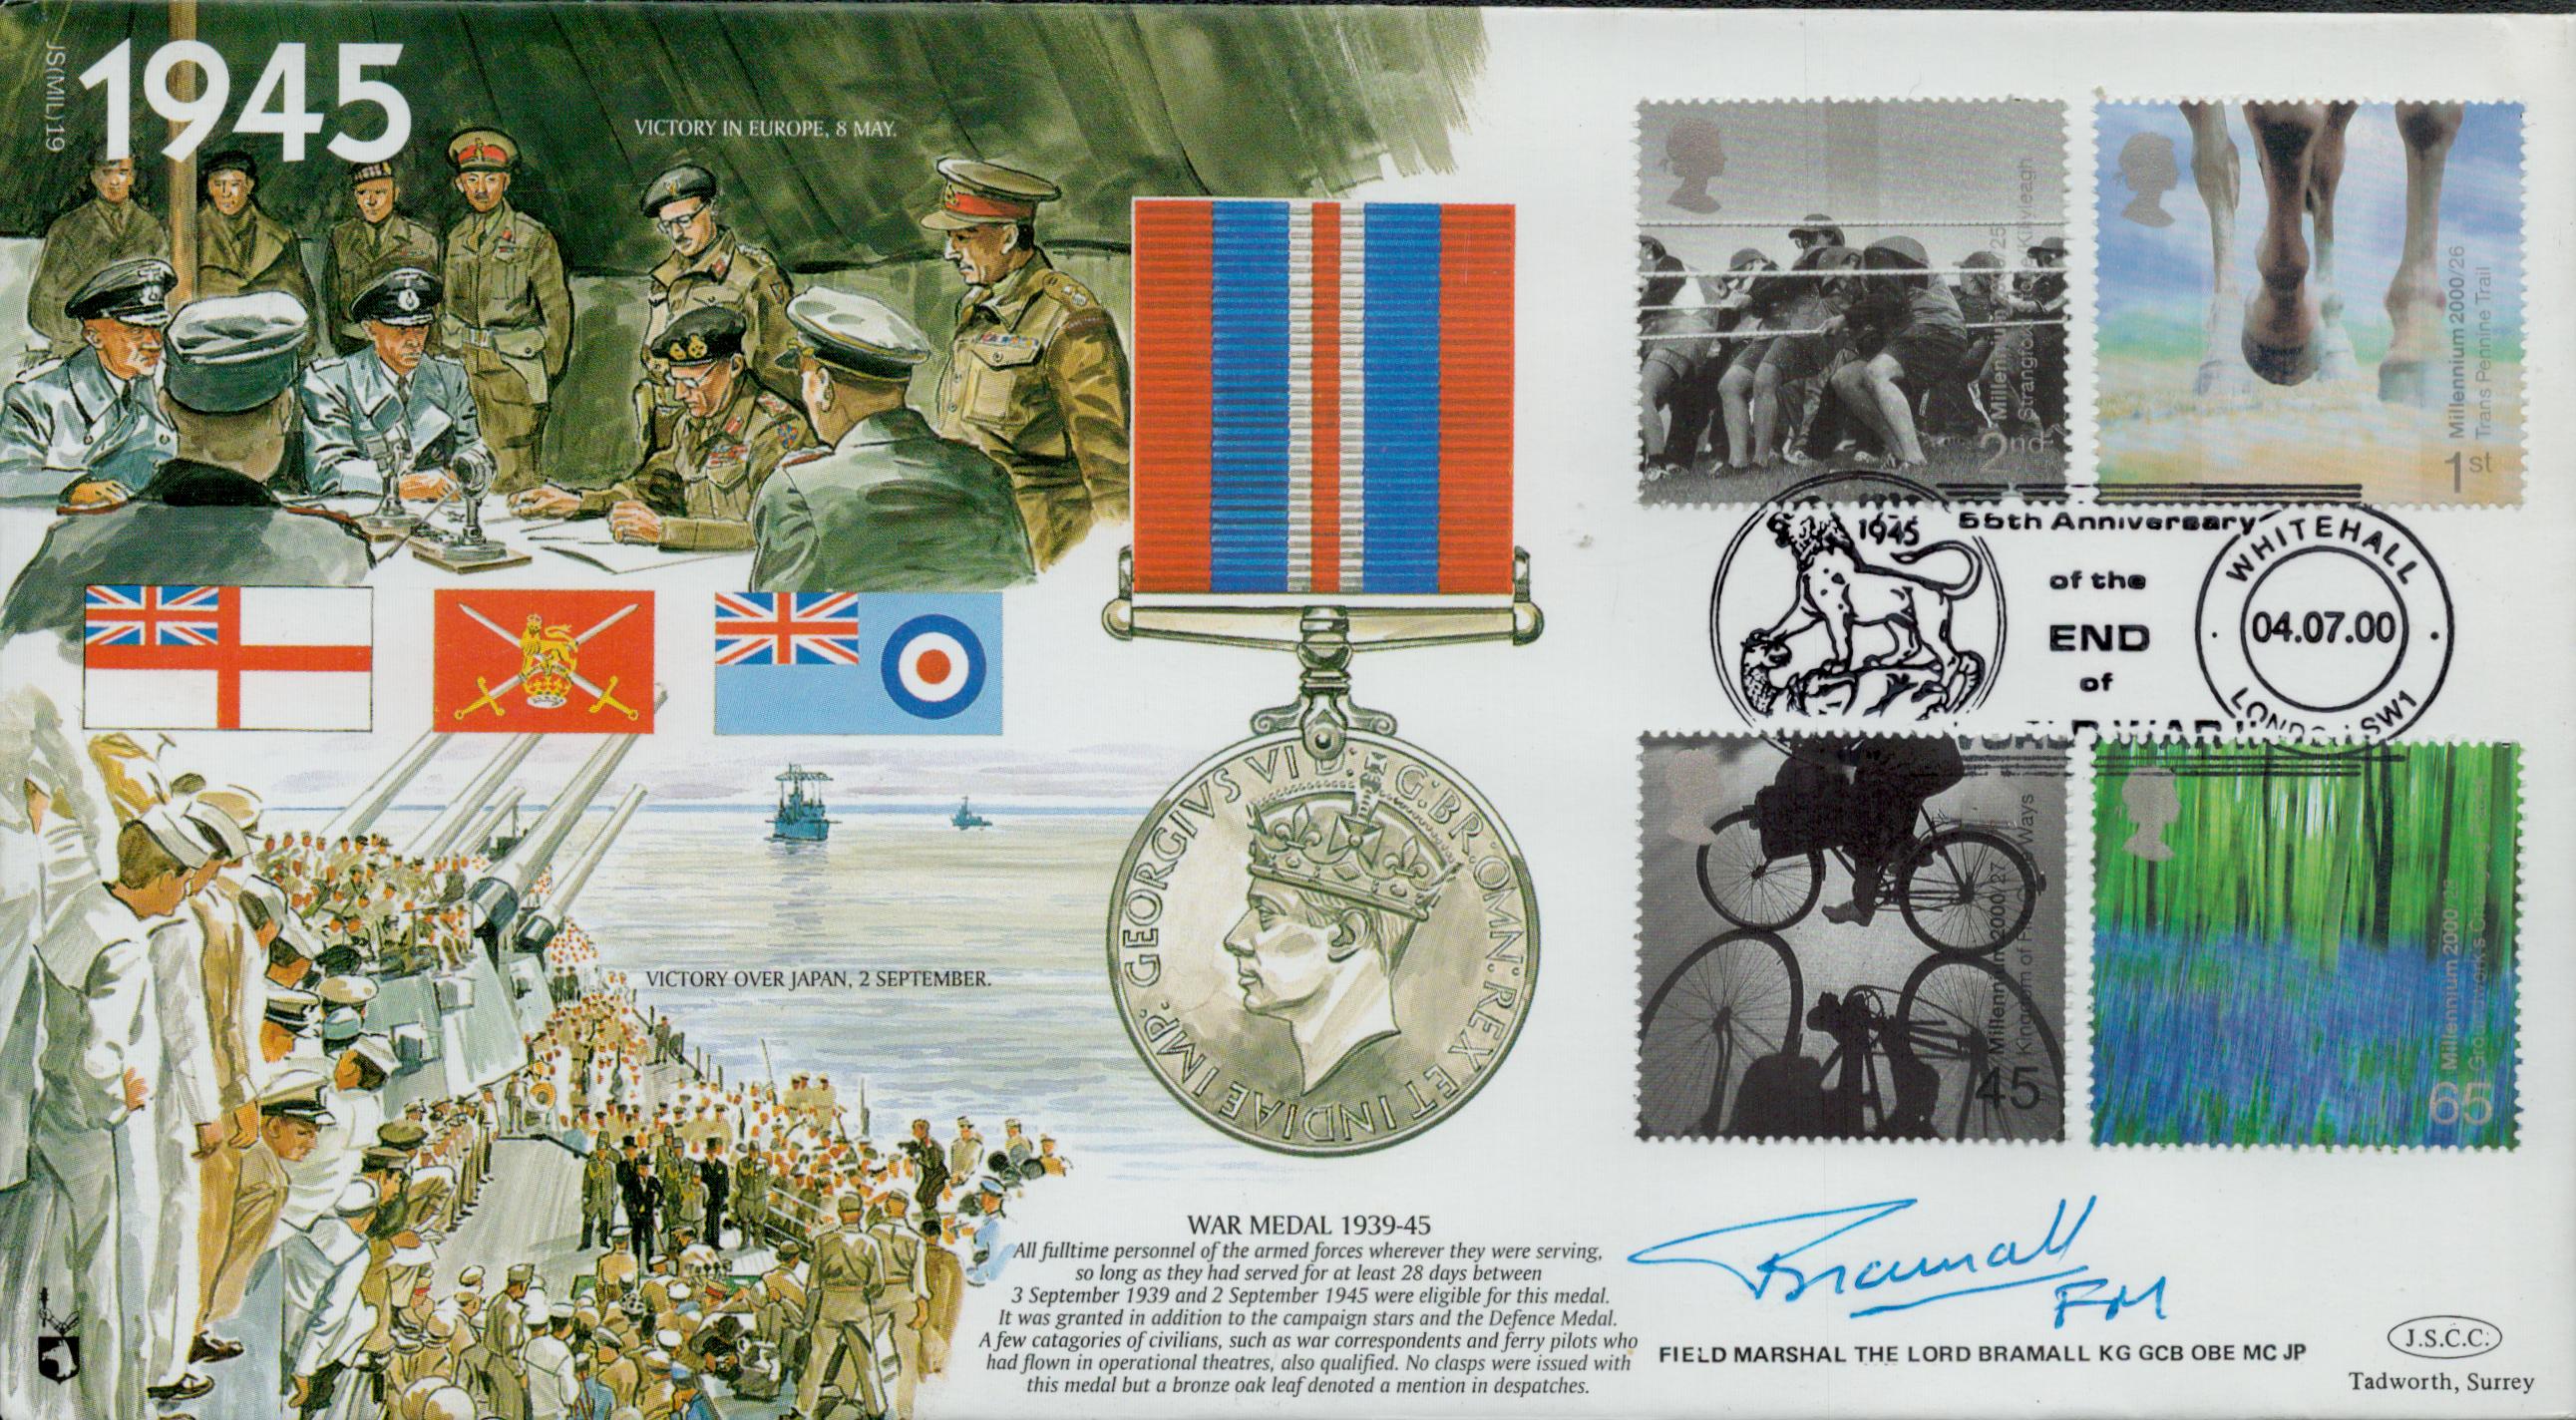 WWII Field Marshall The Lord Bramall KG GCB OBE MC JP signed Great War 1945 commemorative FDC (JS(